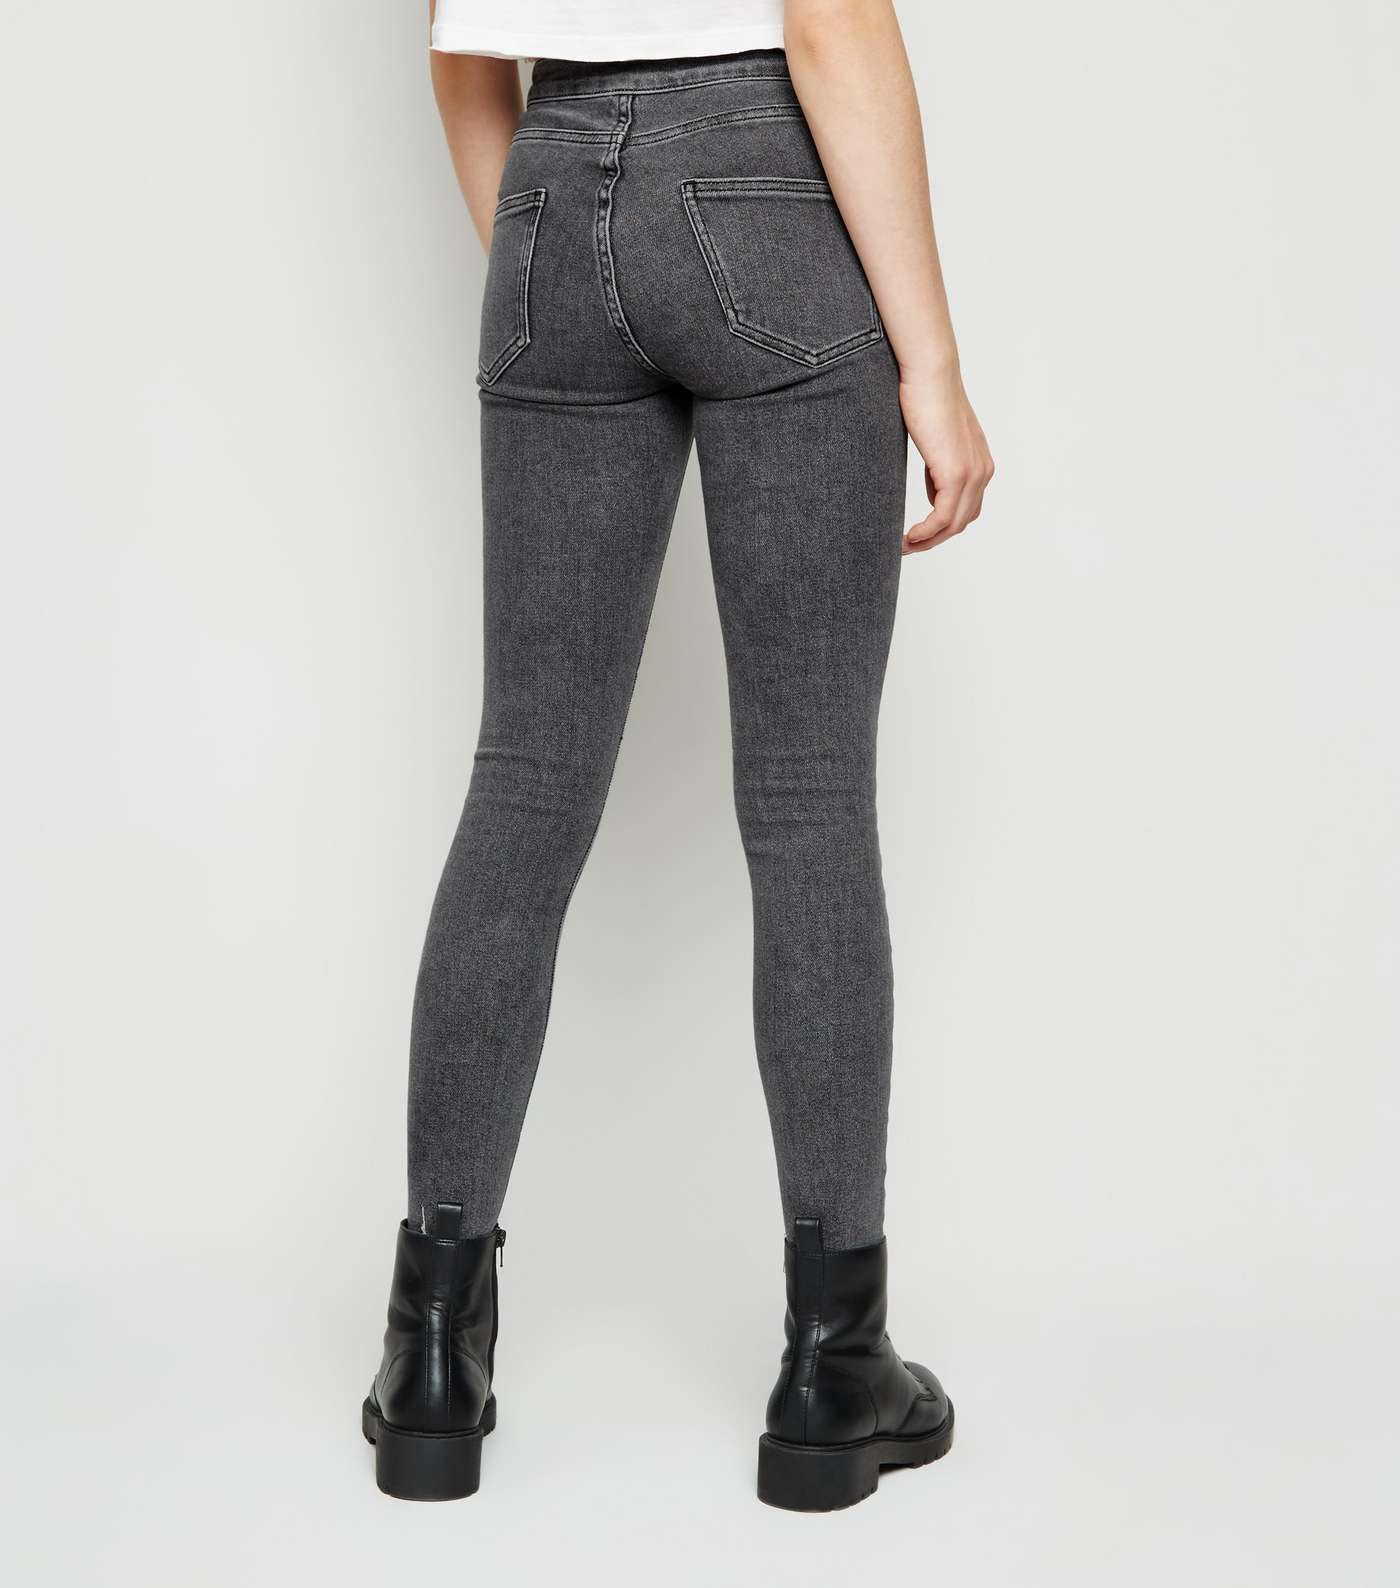 Girls Grey Ripped High Waist Super Skinny Jeans Image 3